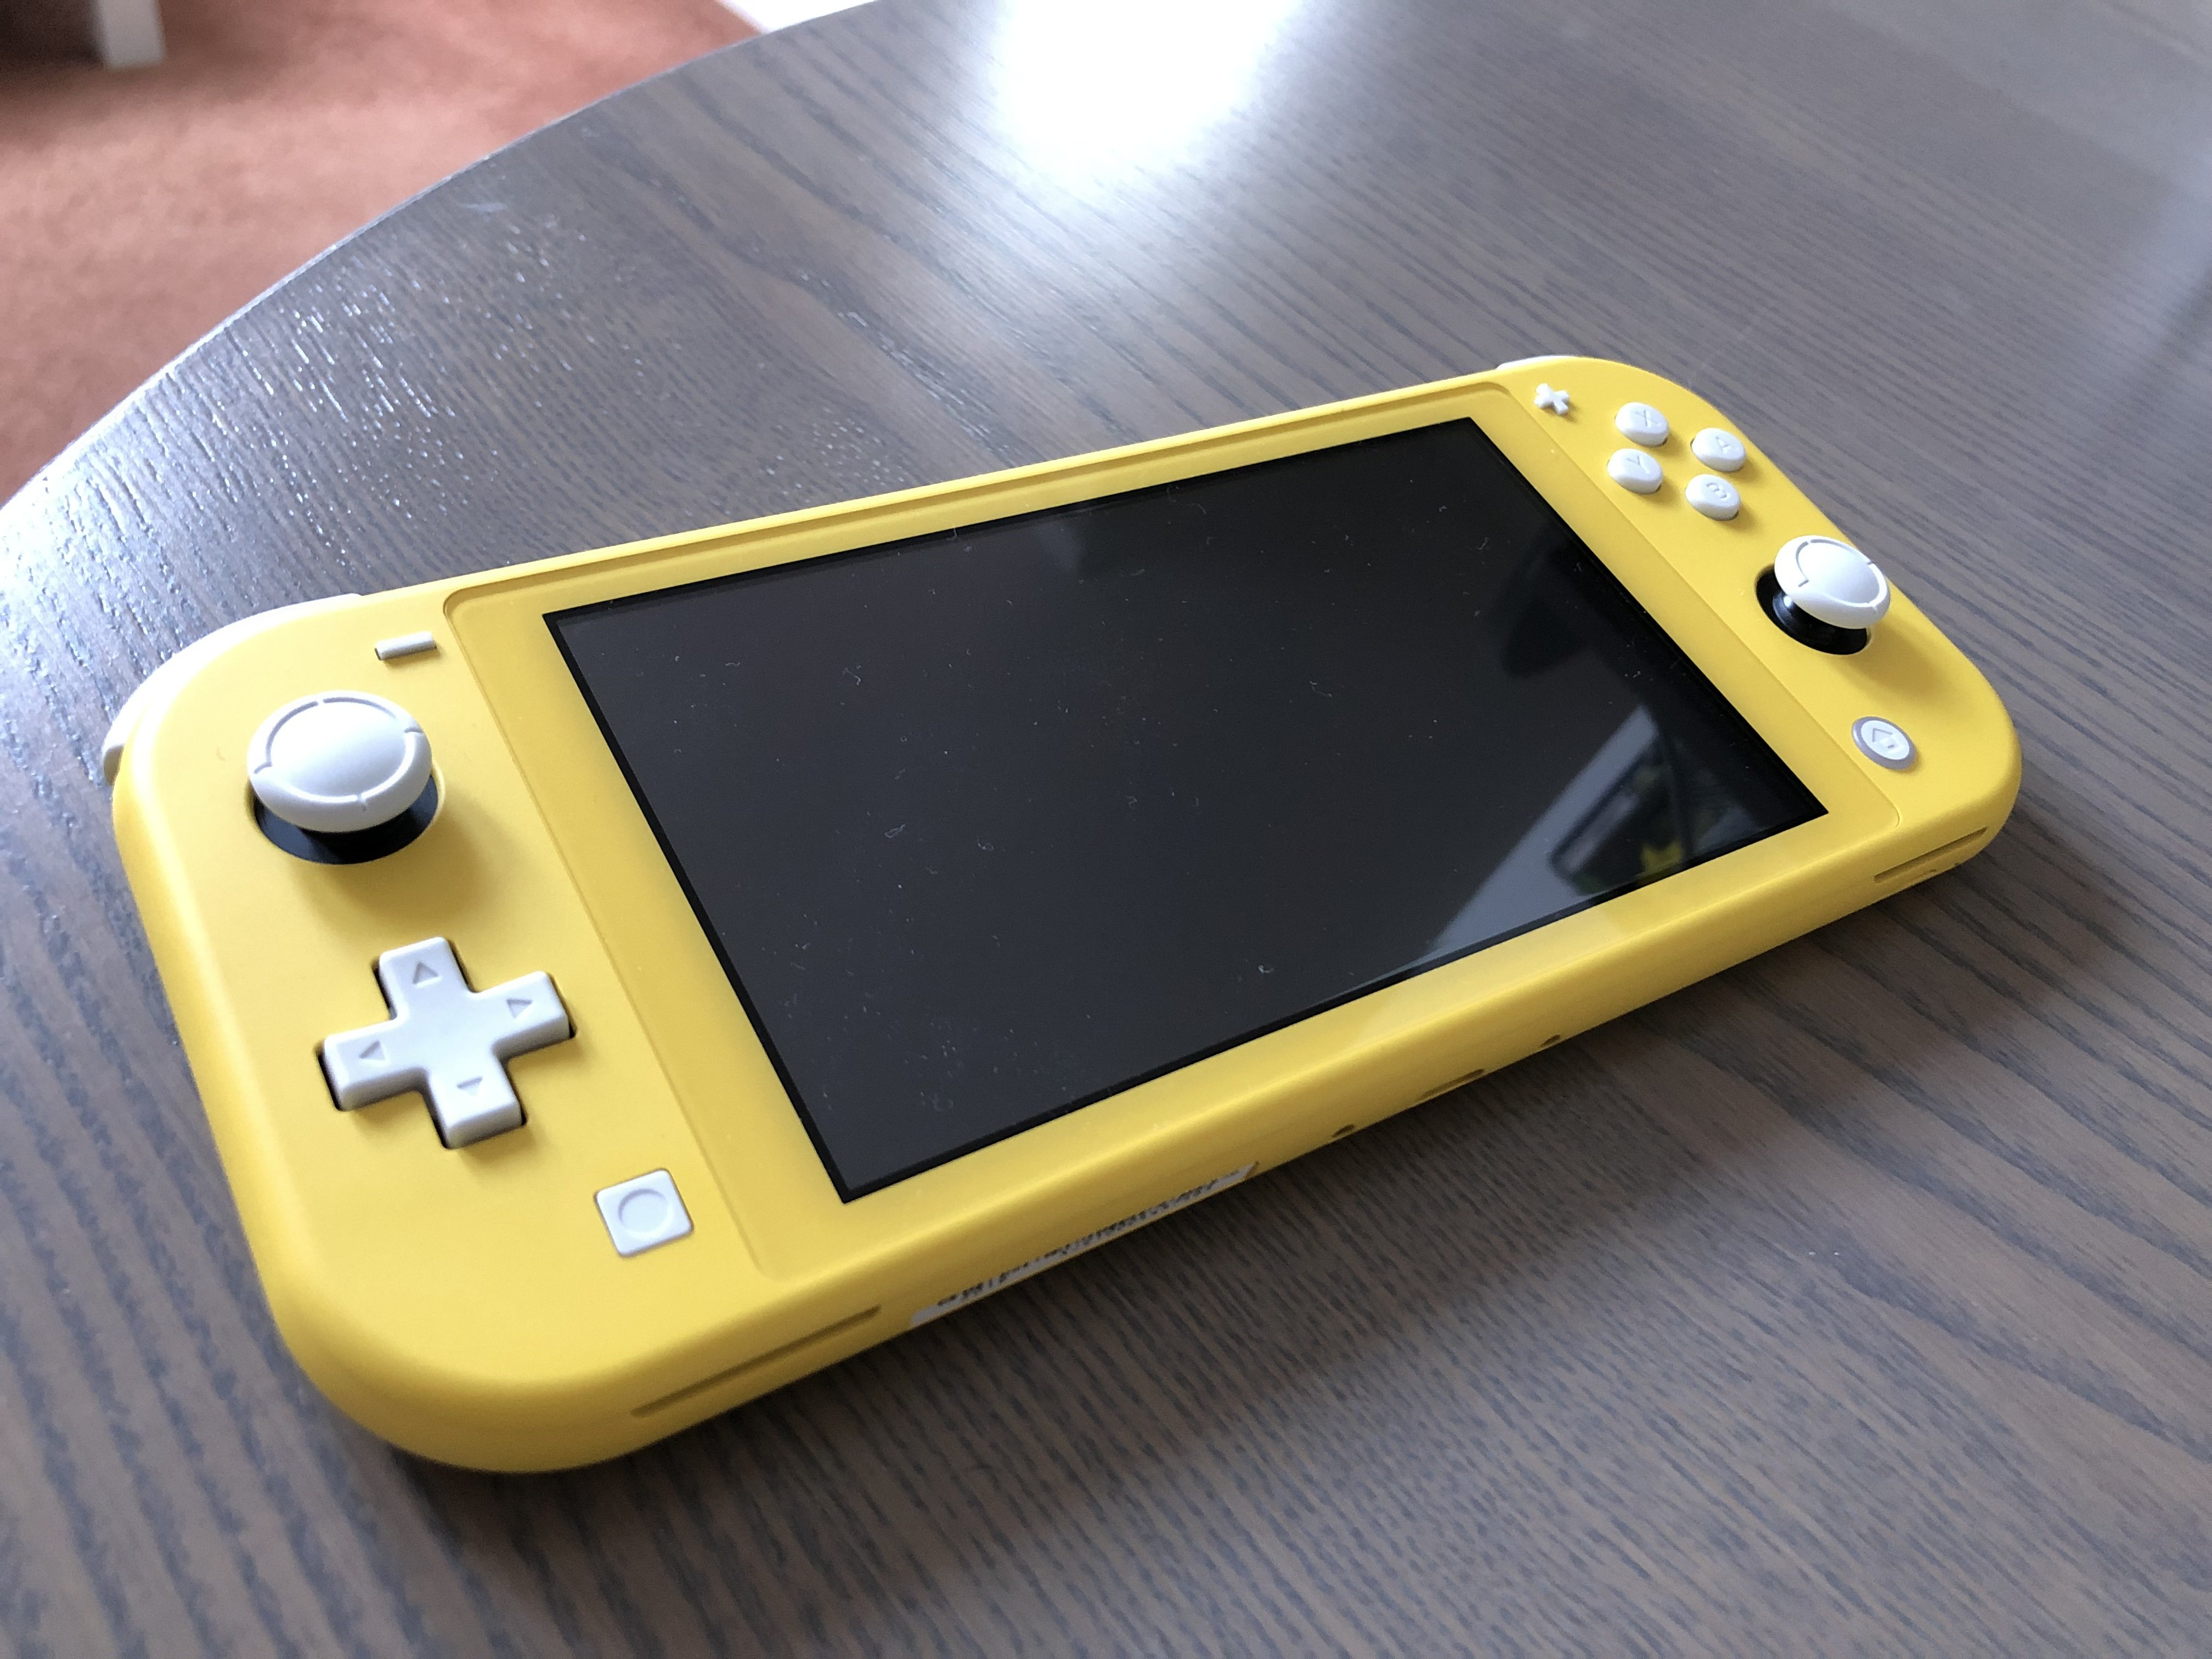 used nintendo switch lite games